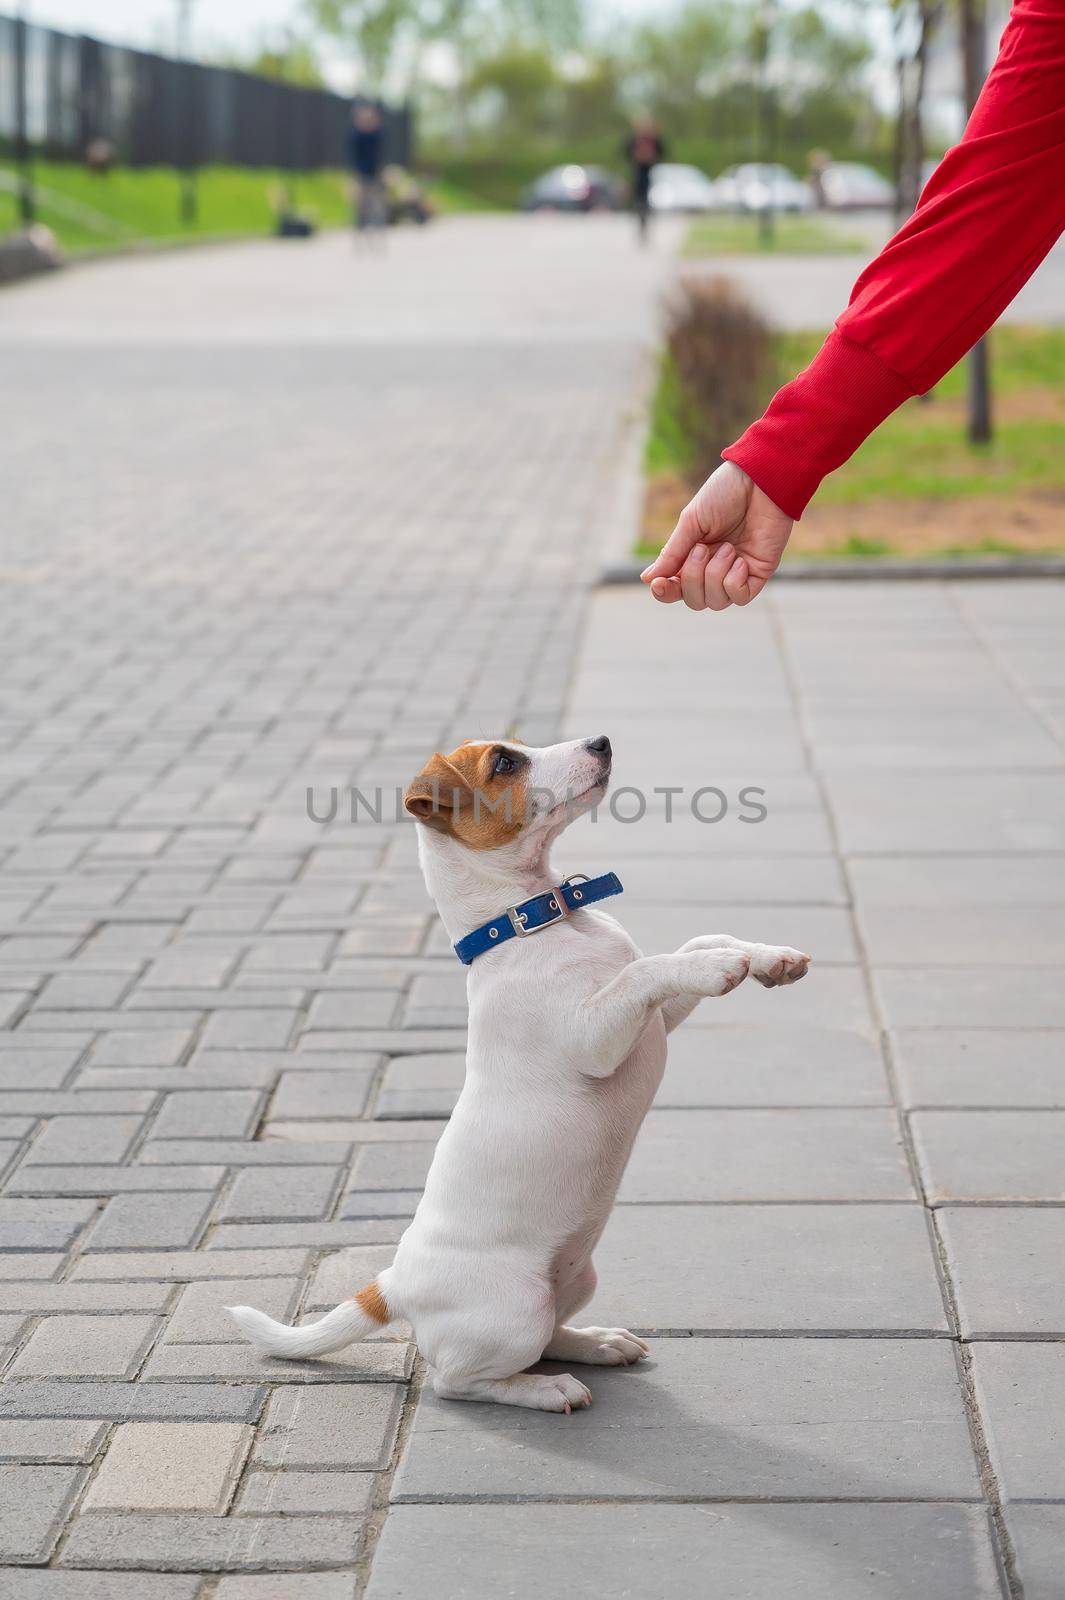 Clever puppy Jack Russell Terrier plays with the owner on the street. A thoroughbred shorthair dog jumping at the hand of an unrecognizable woman. Energetic pet in motion